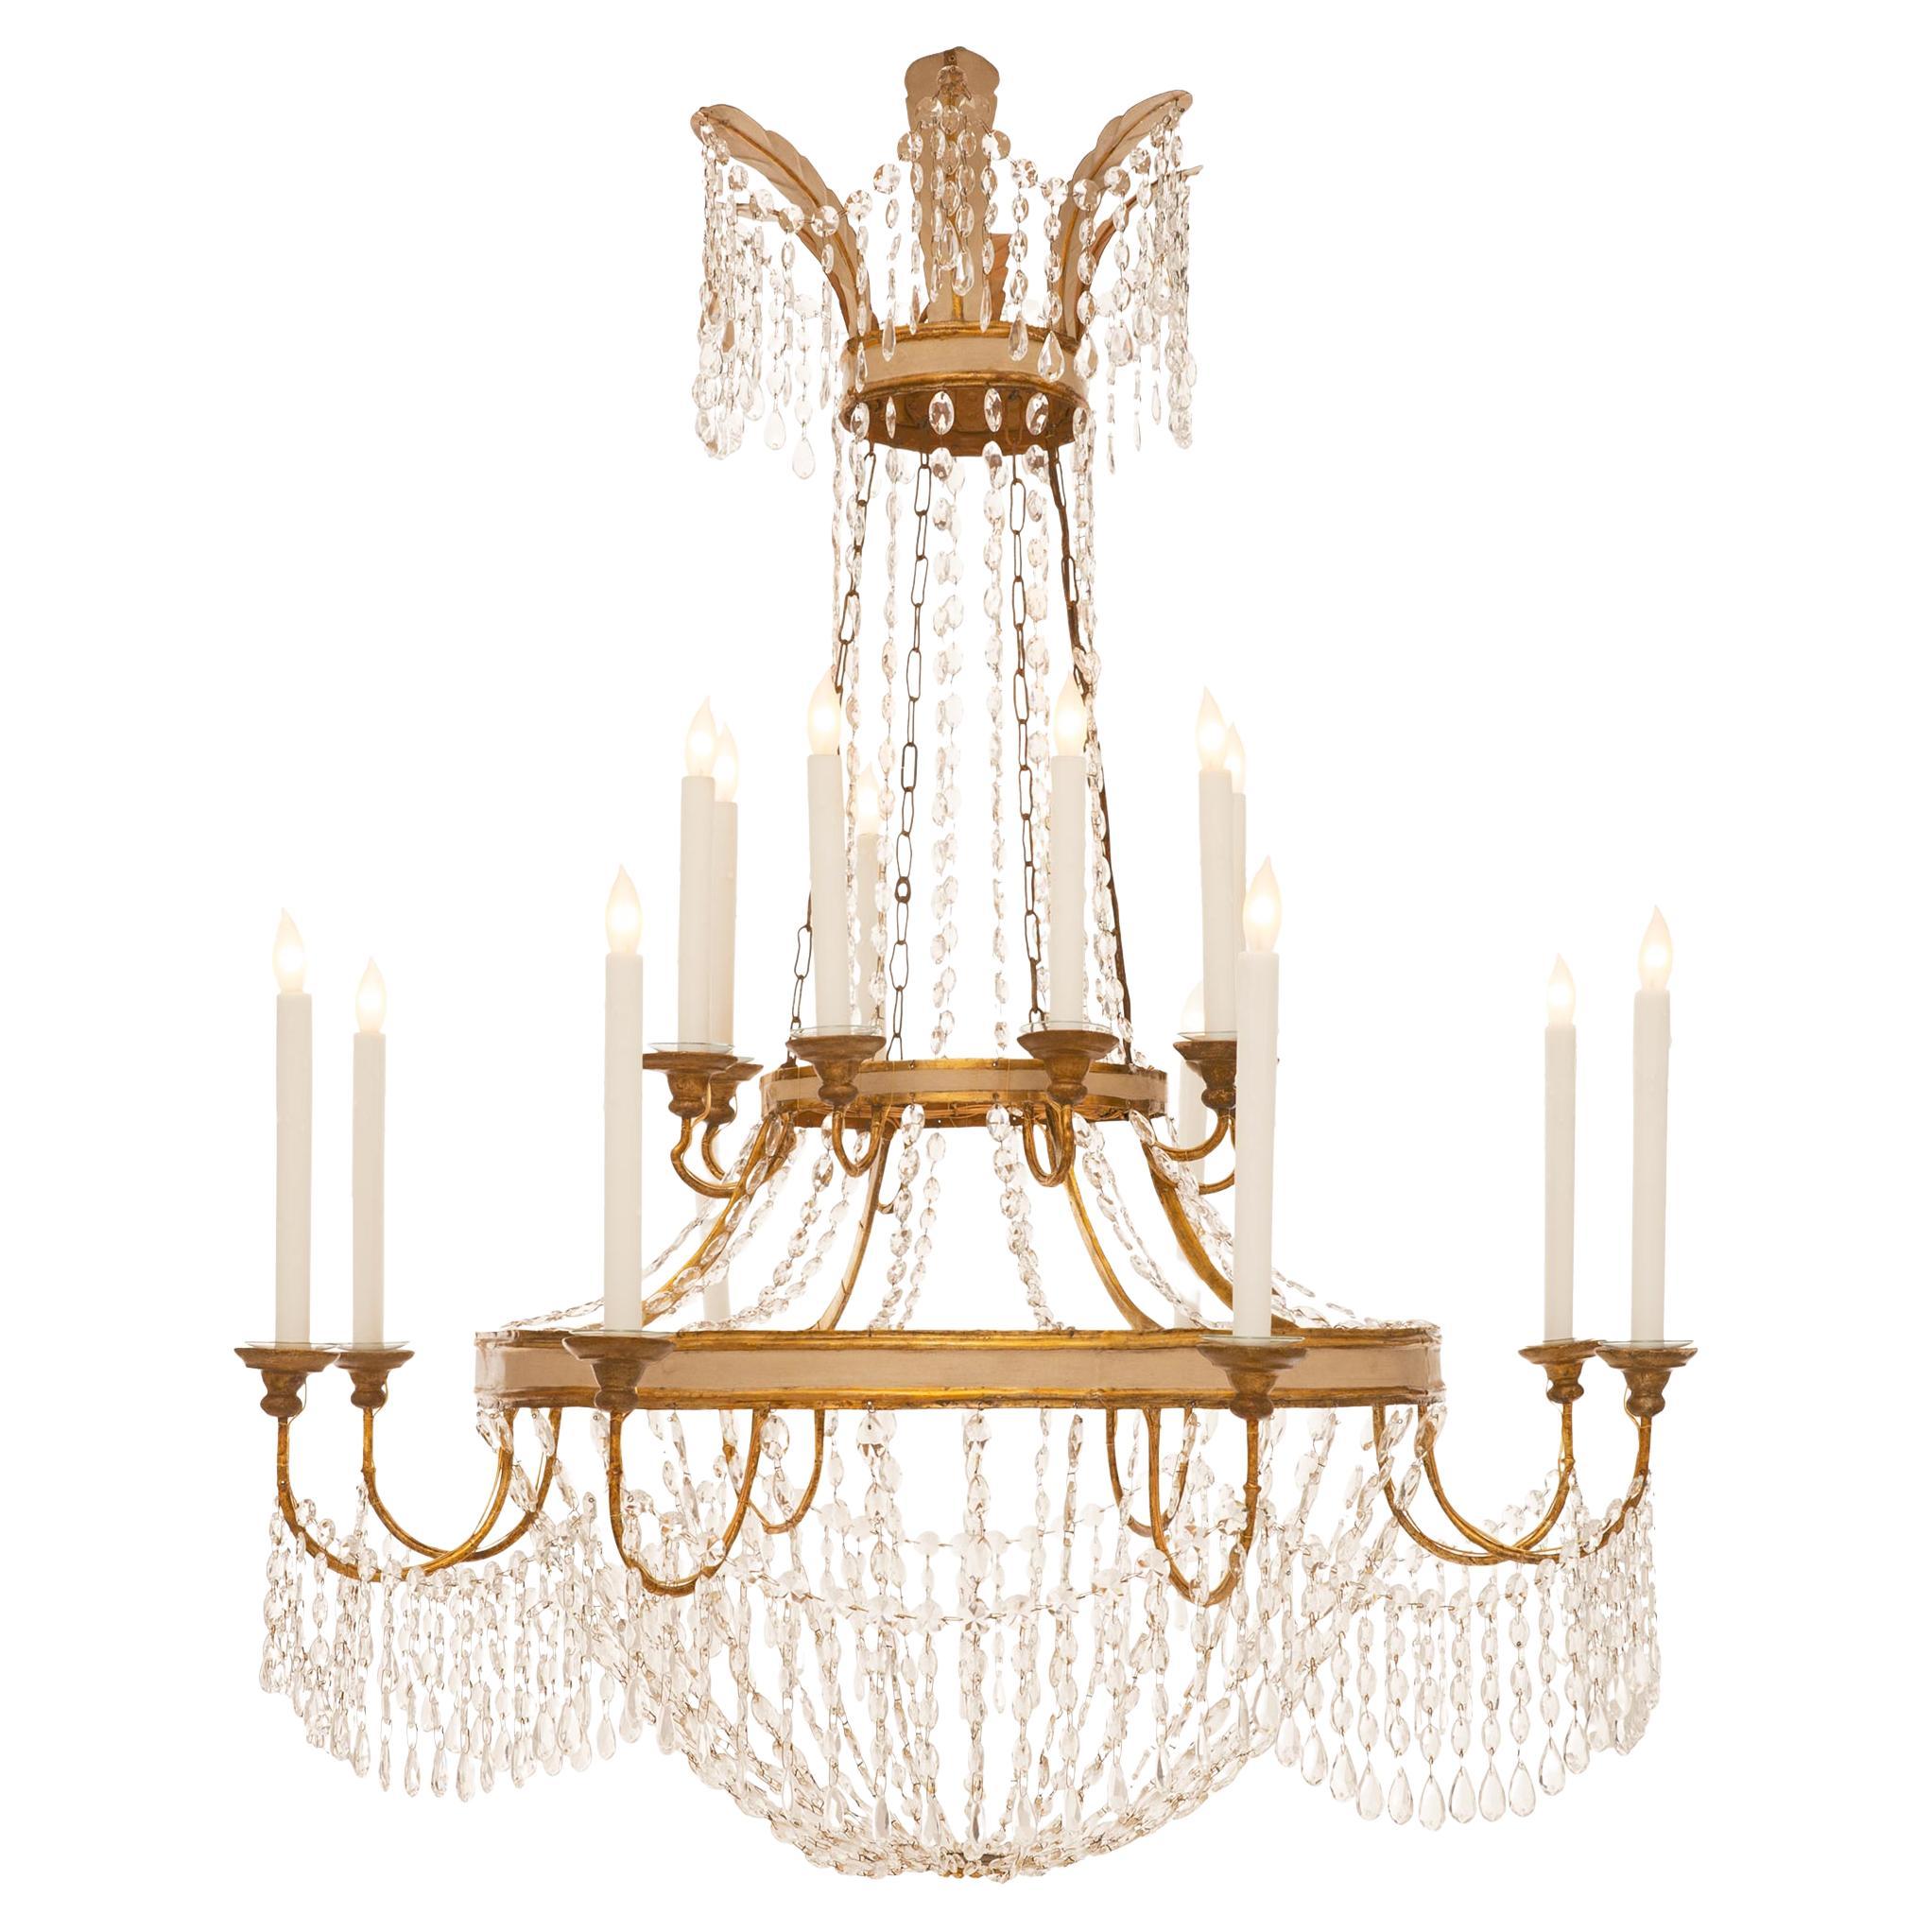 An Italian 18th century Neo-classical st. iron chandelier For Sale